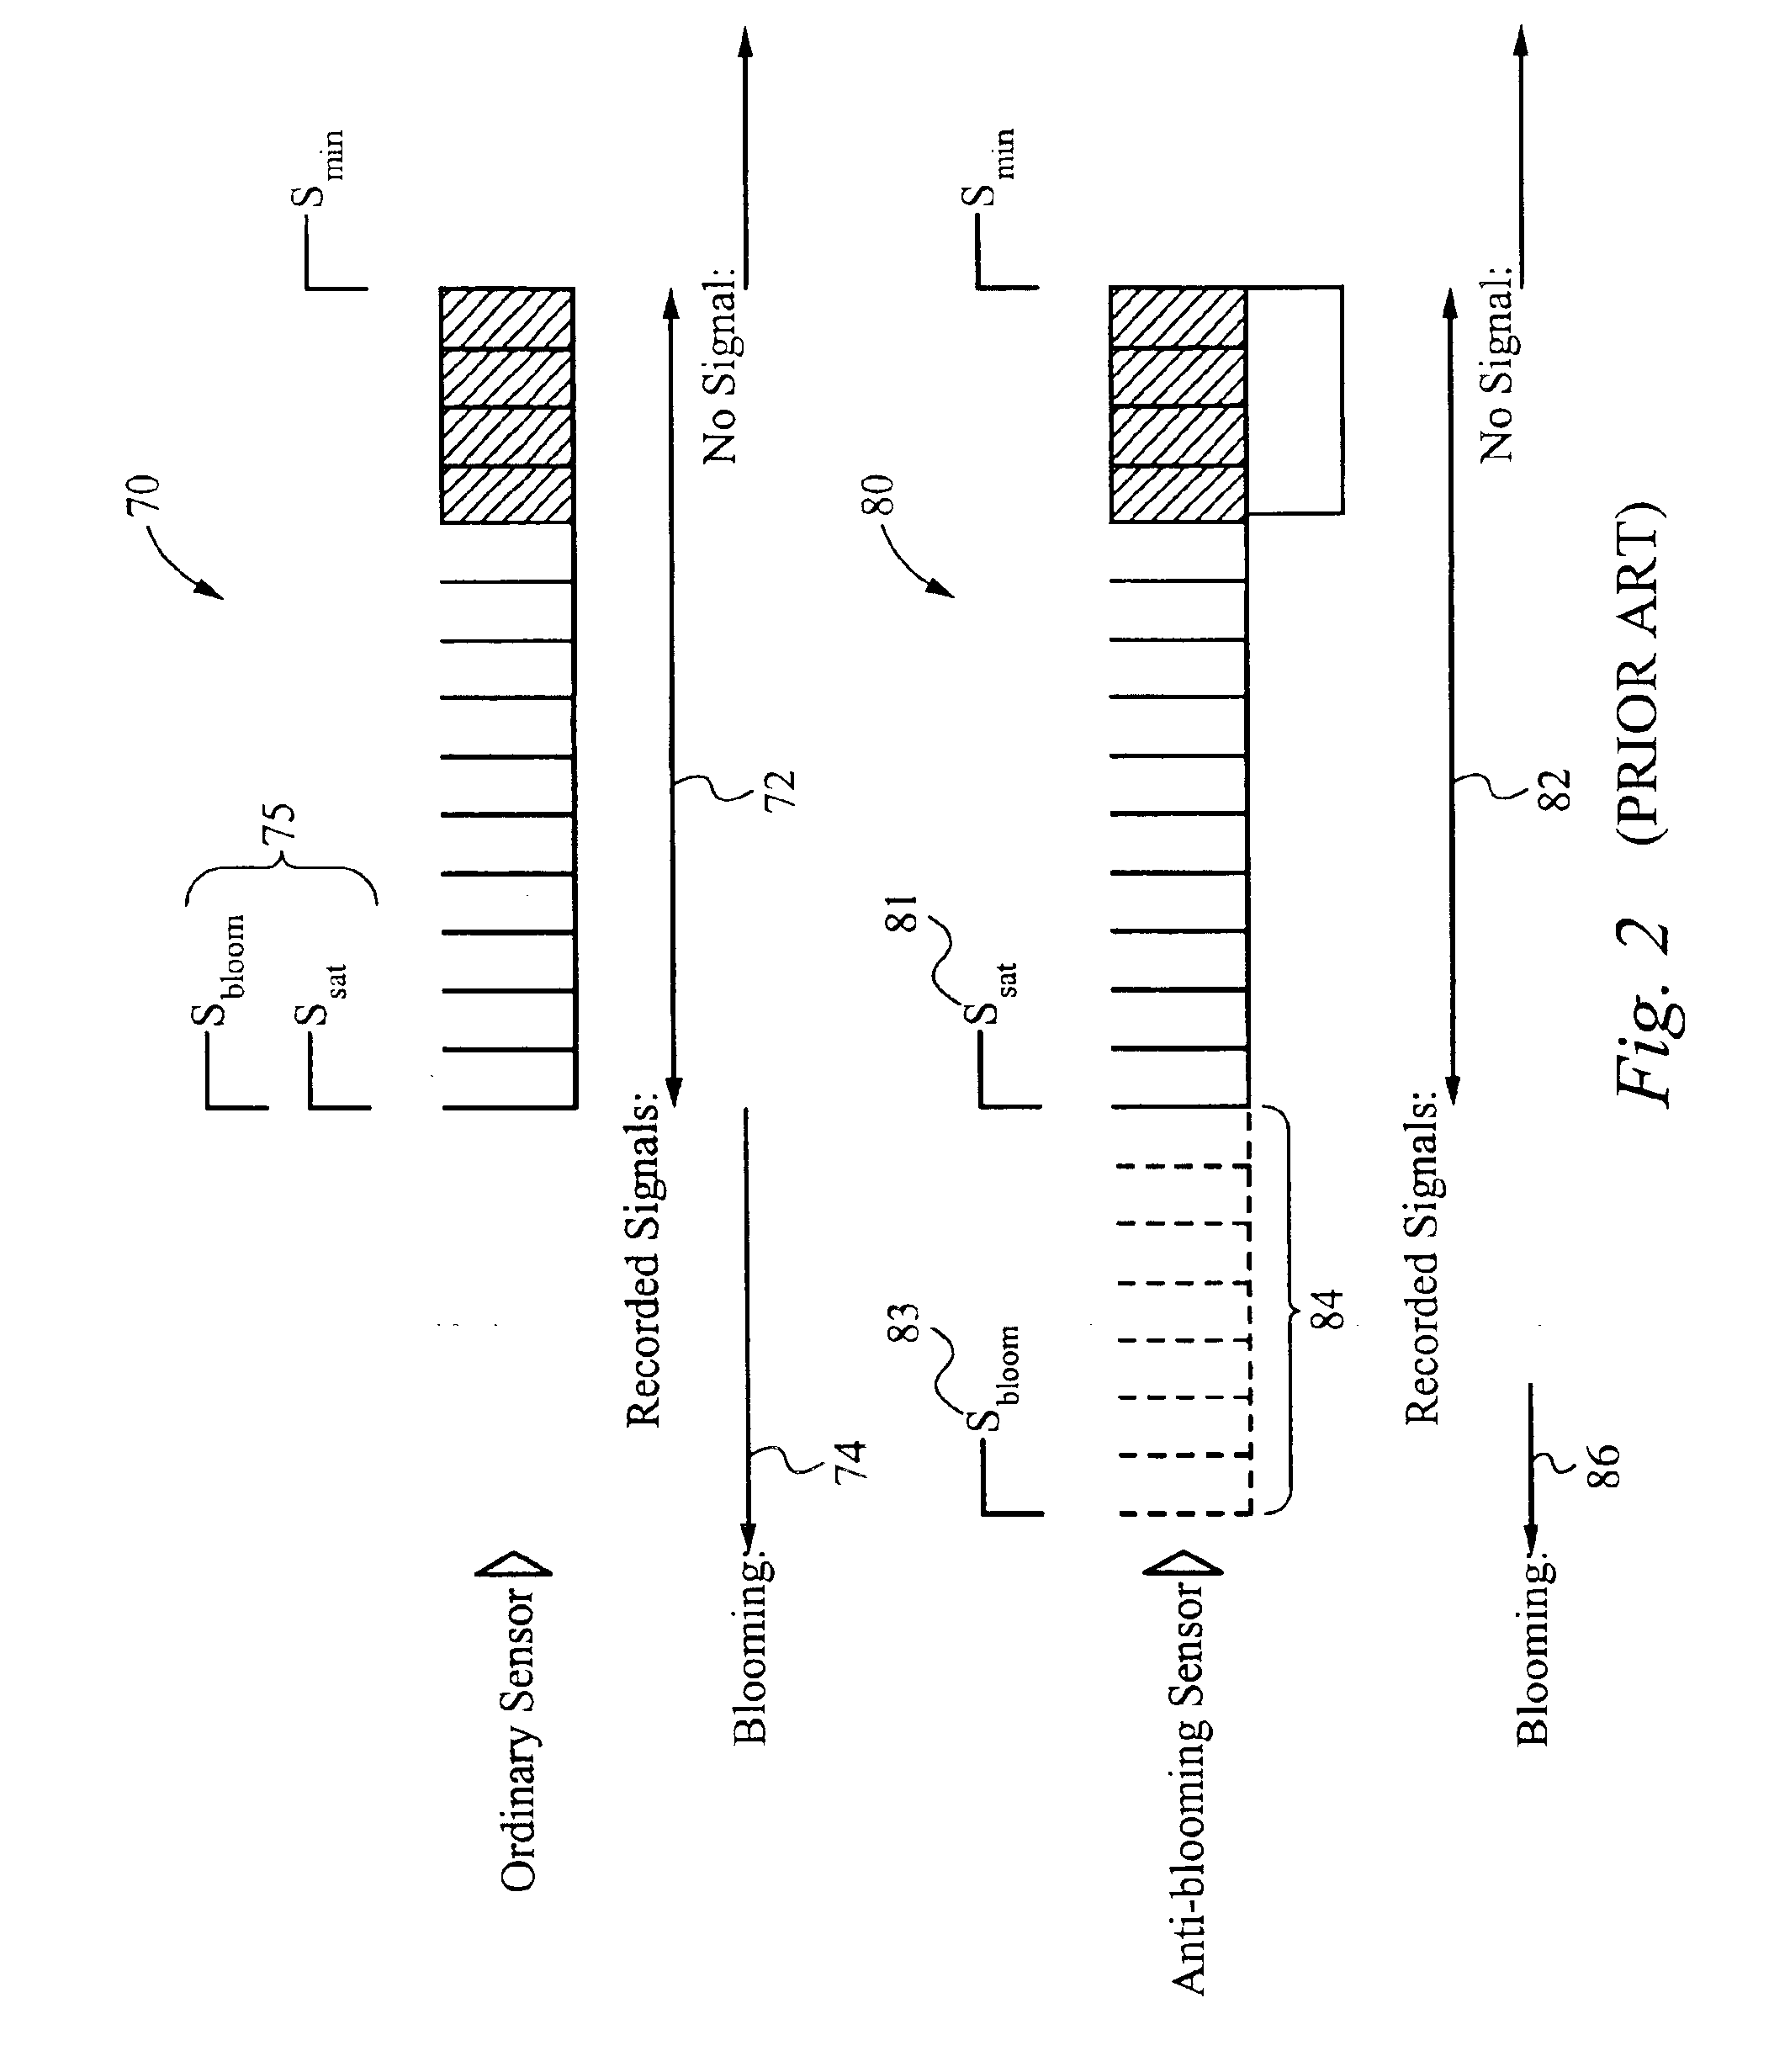 Method of and apparatus for extending signal ranges of digital images